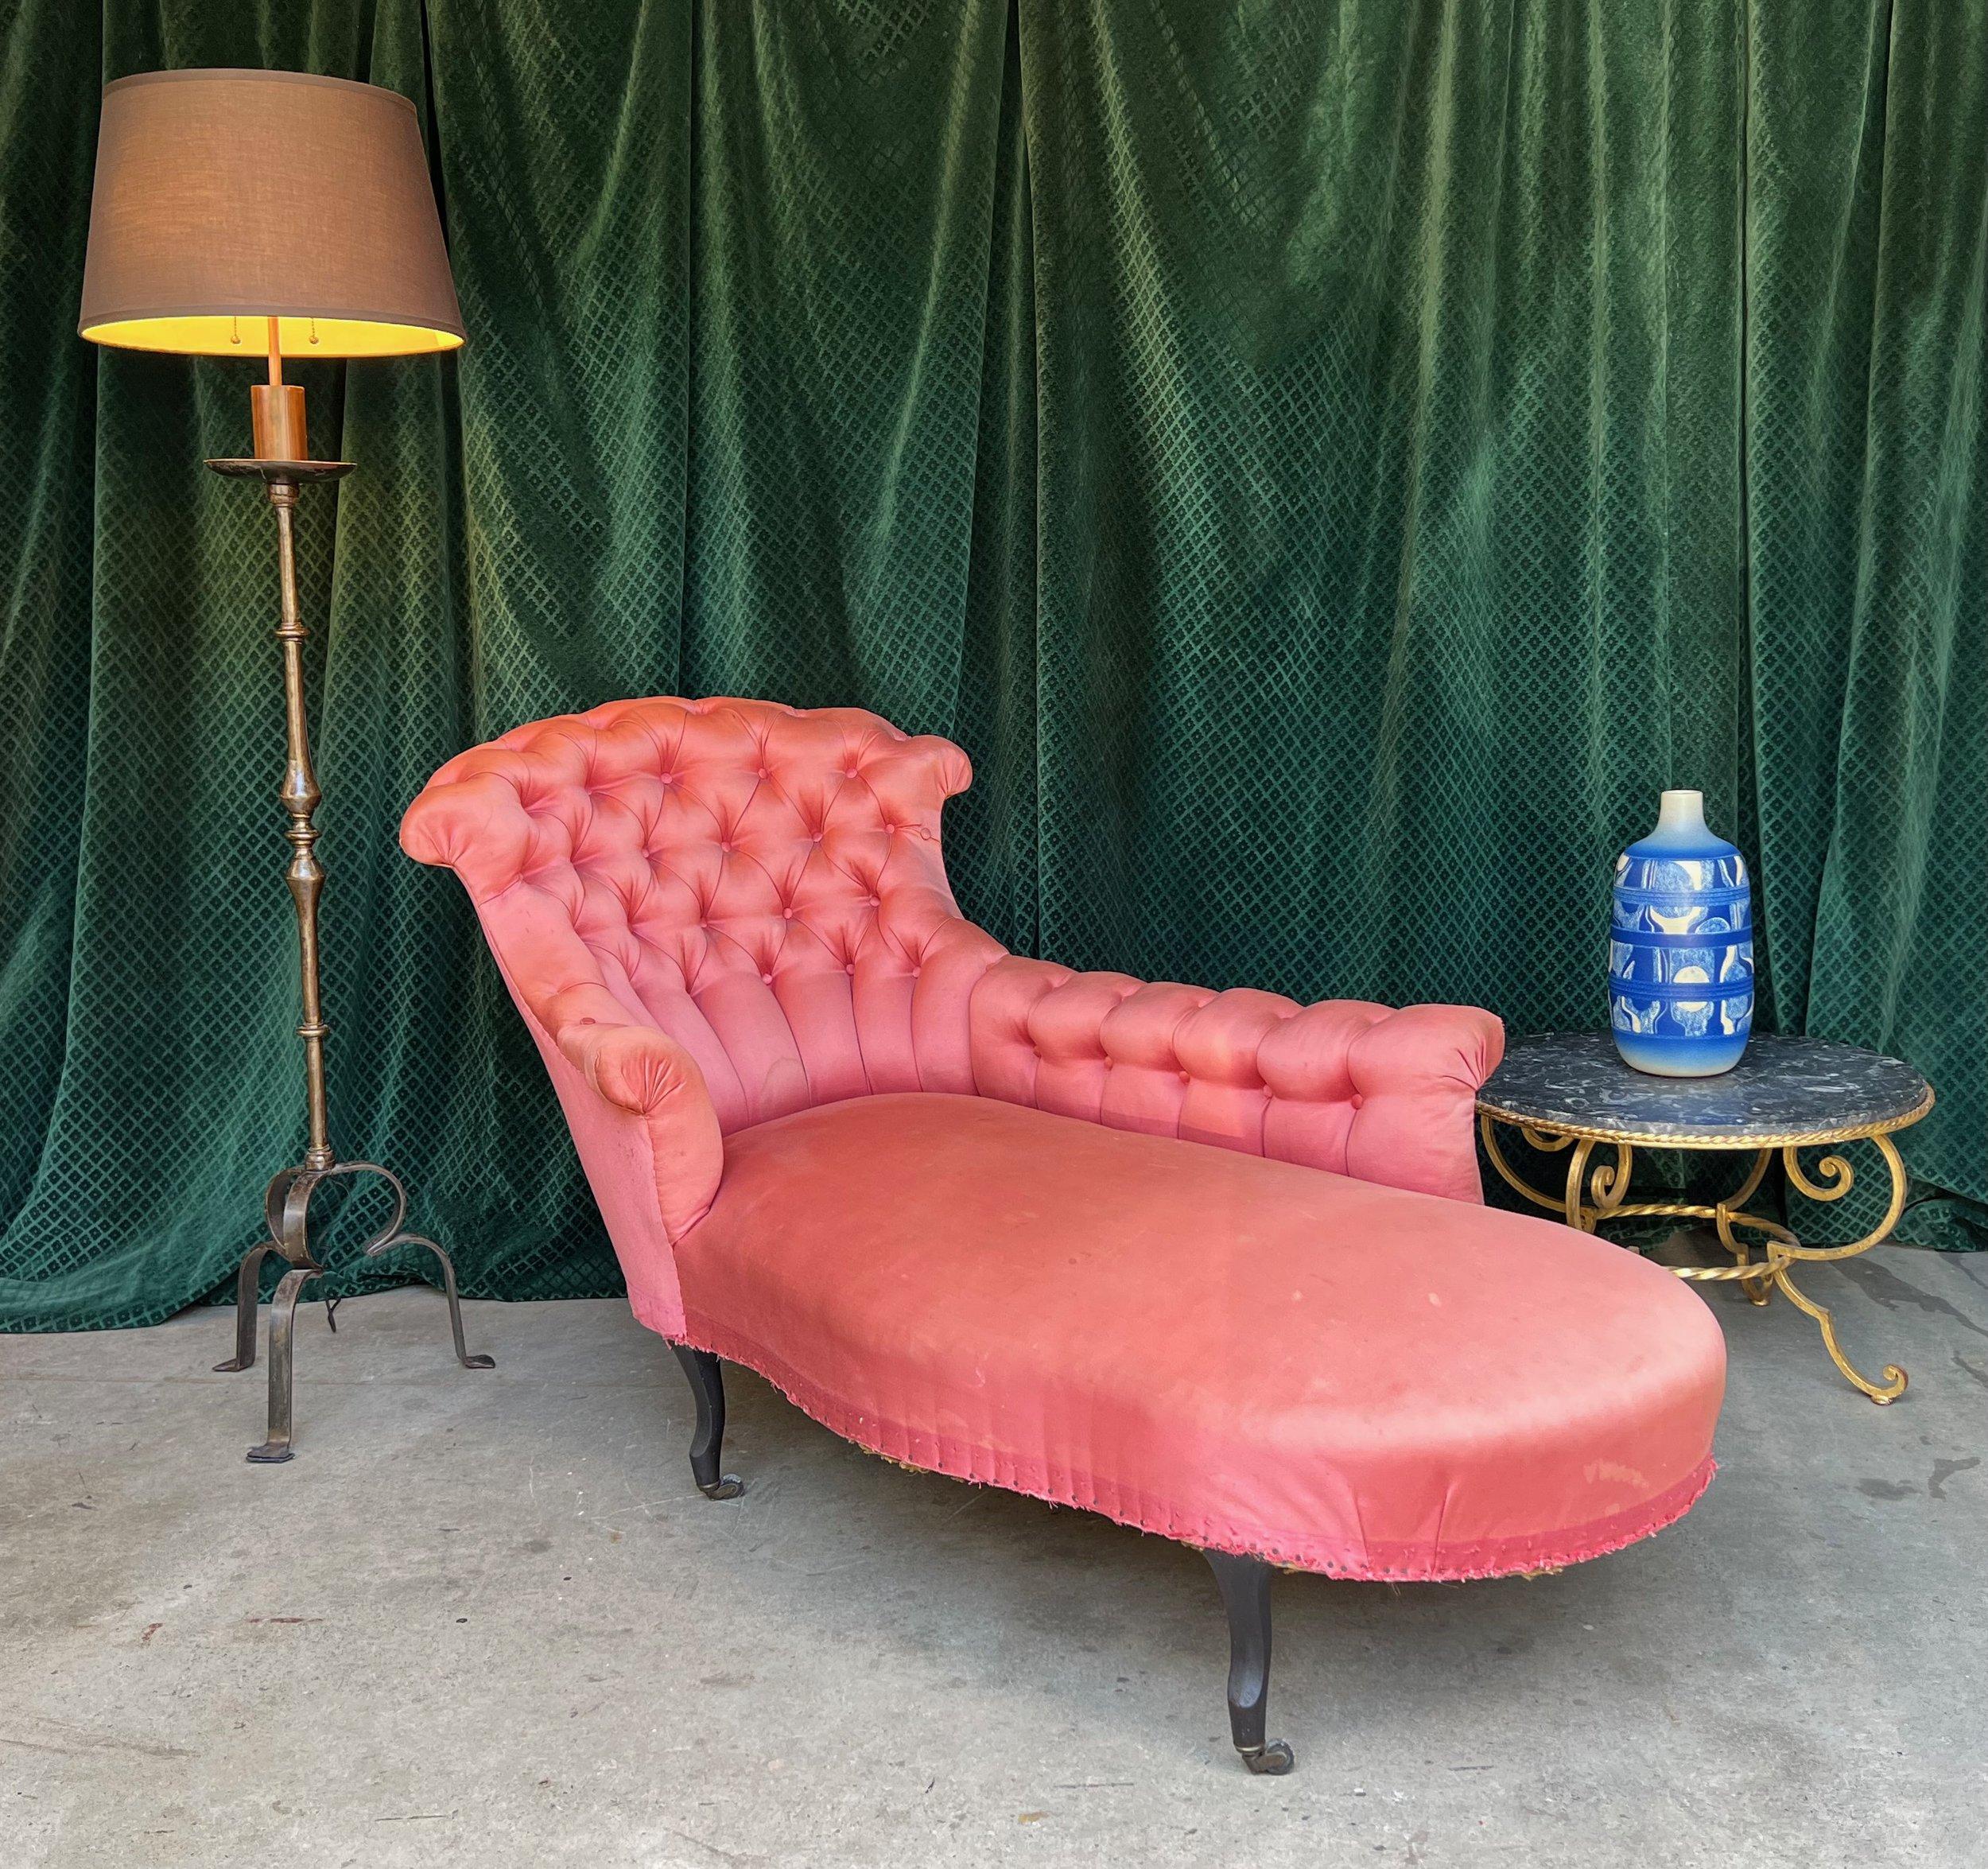 This unique French 19th century Napoleon III tufted chaise lounge merges conventional design with chic, unusual period features. The extended left arm and tight seat, along with the heavily tufted inside back and arms, make this piece a standout